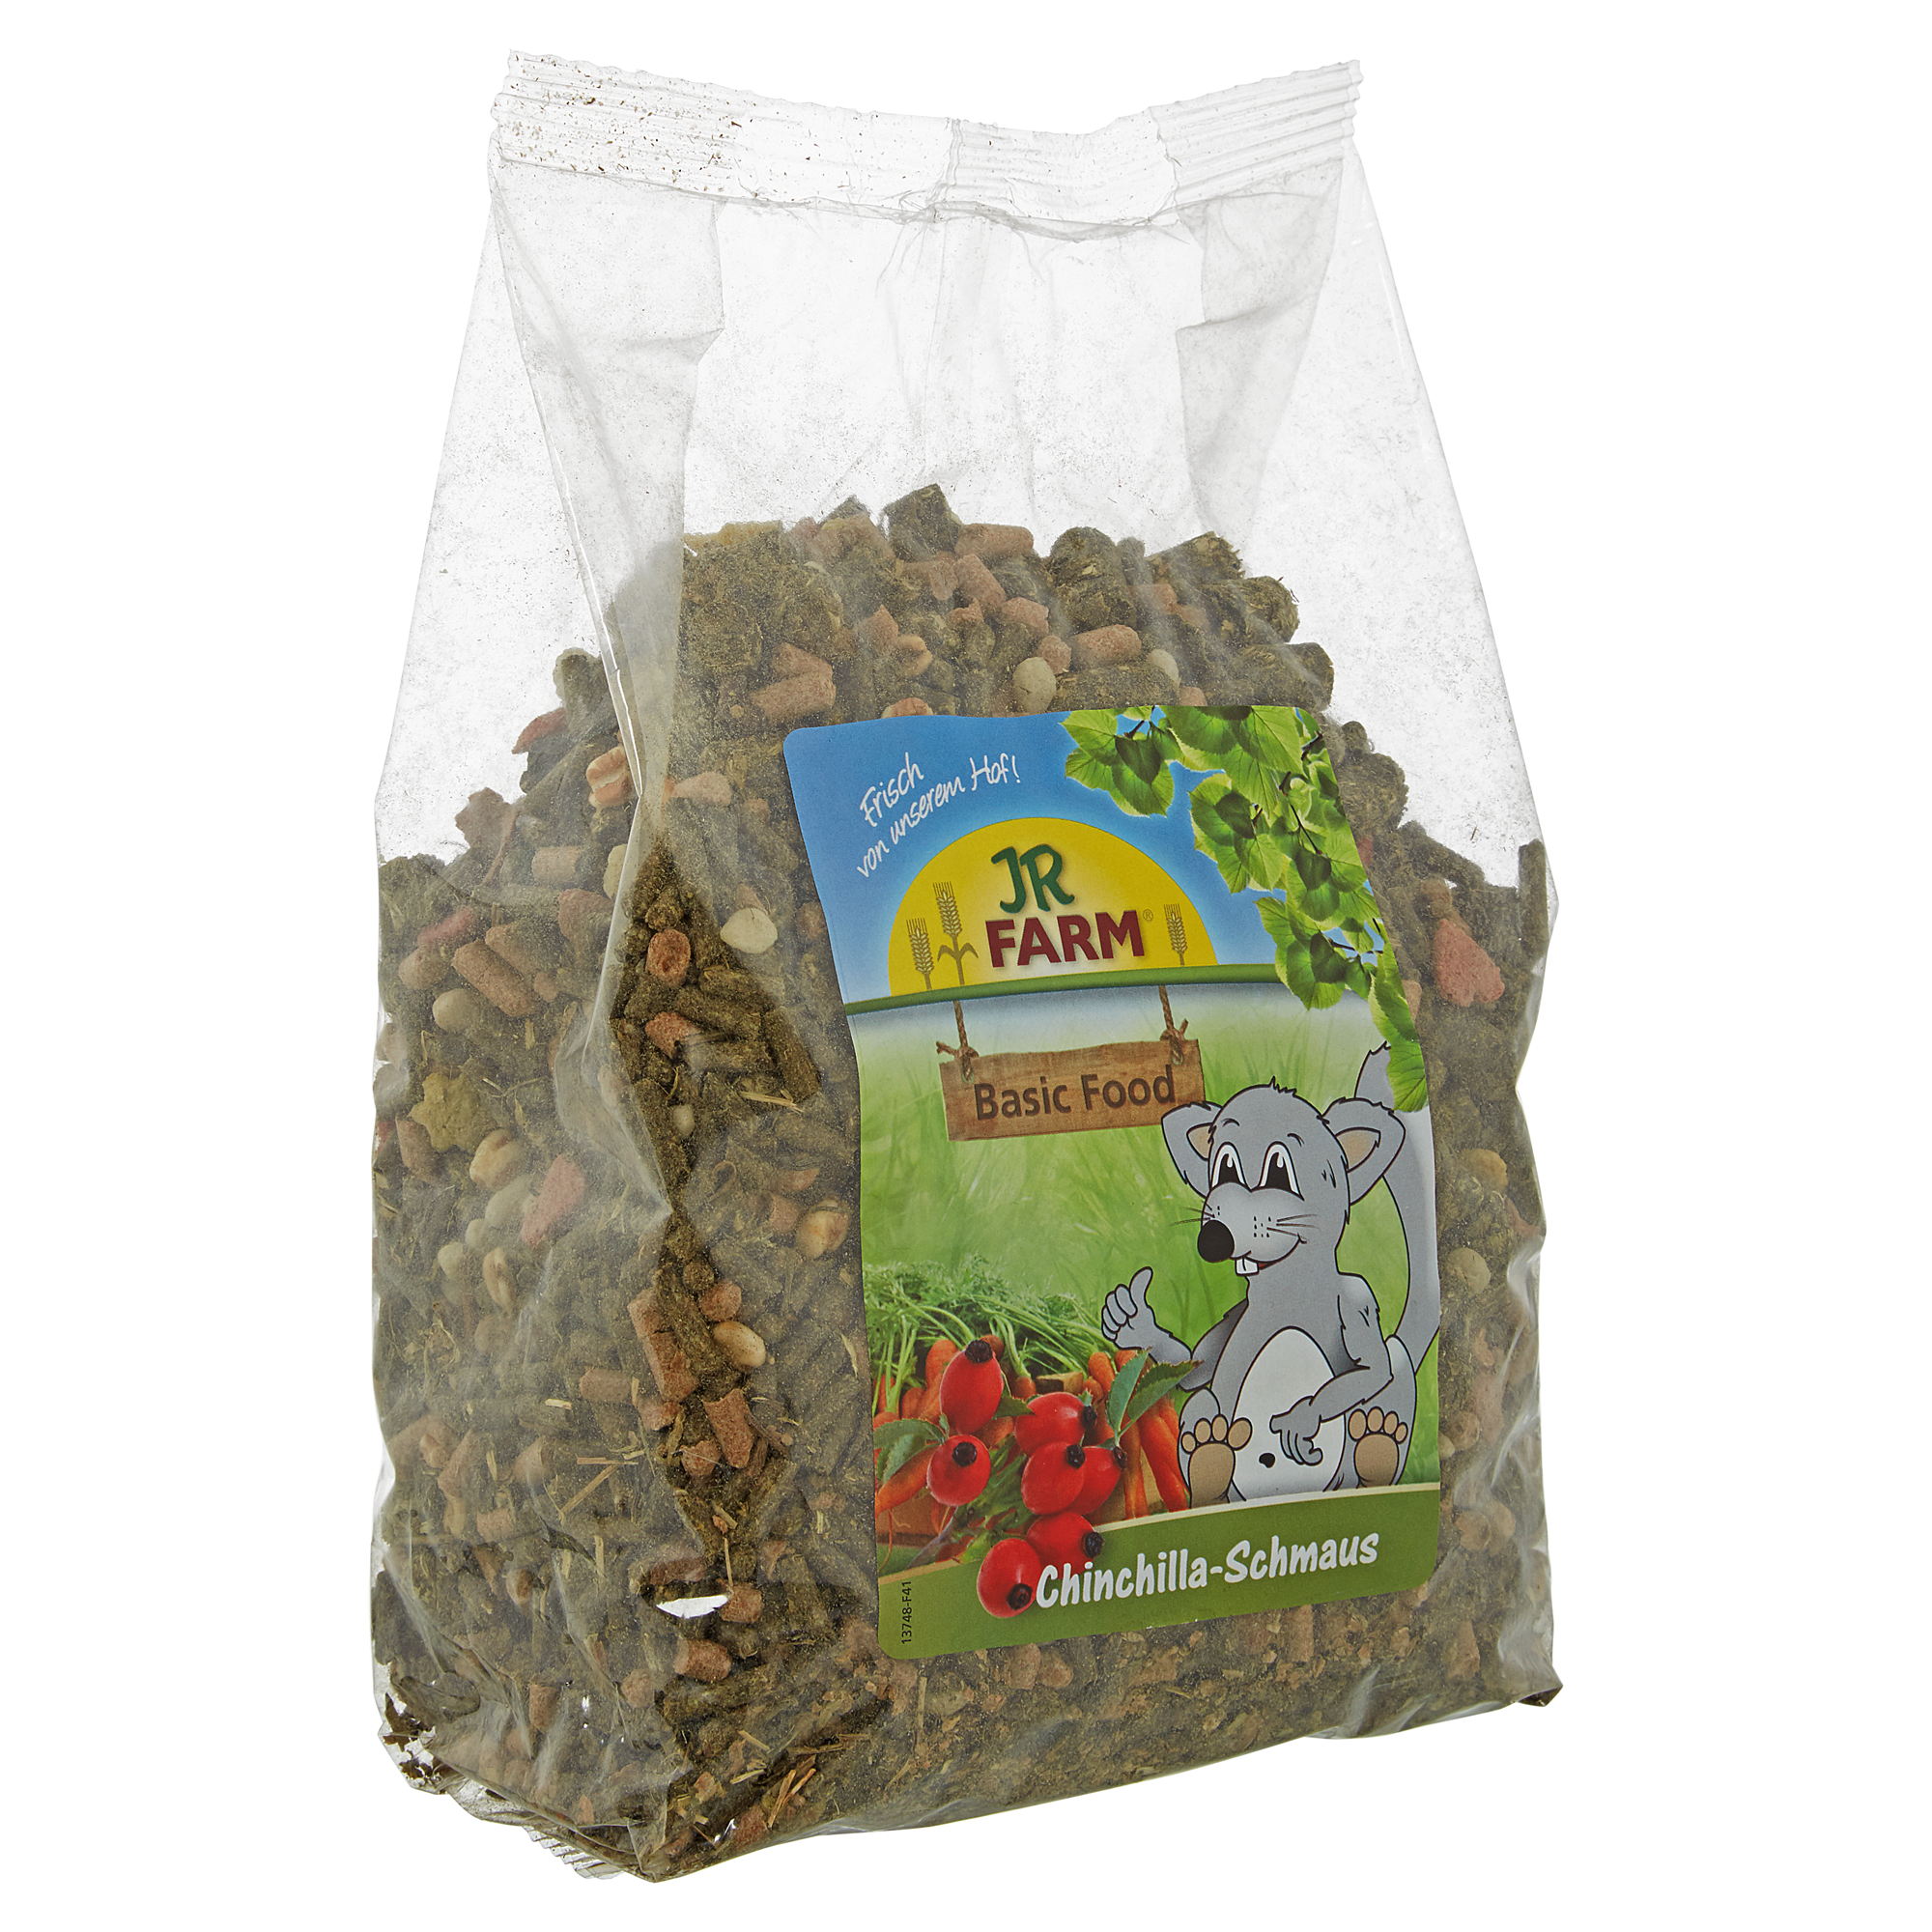 Nagerfutter "Basic Food" Chinchilla-Schmaus 1,2 kg + product picture